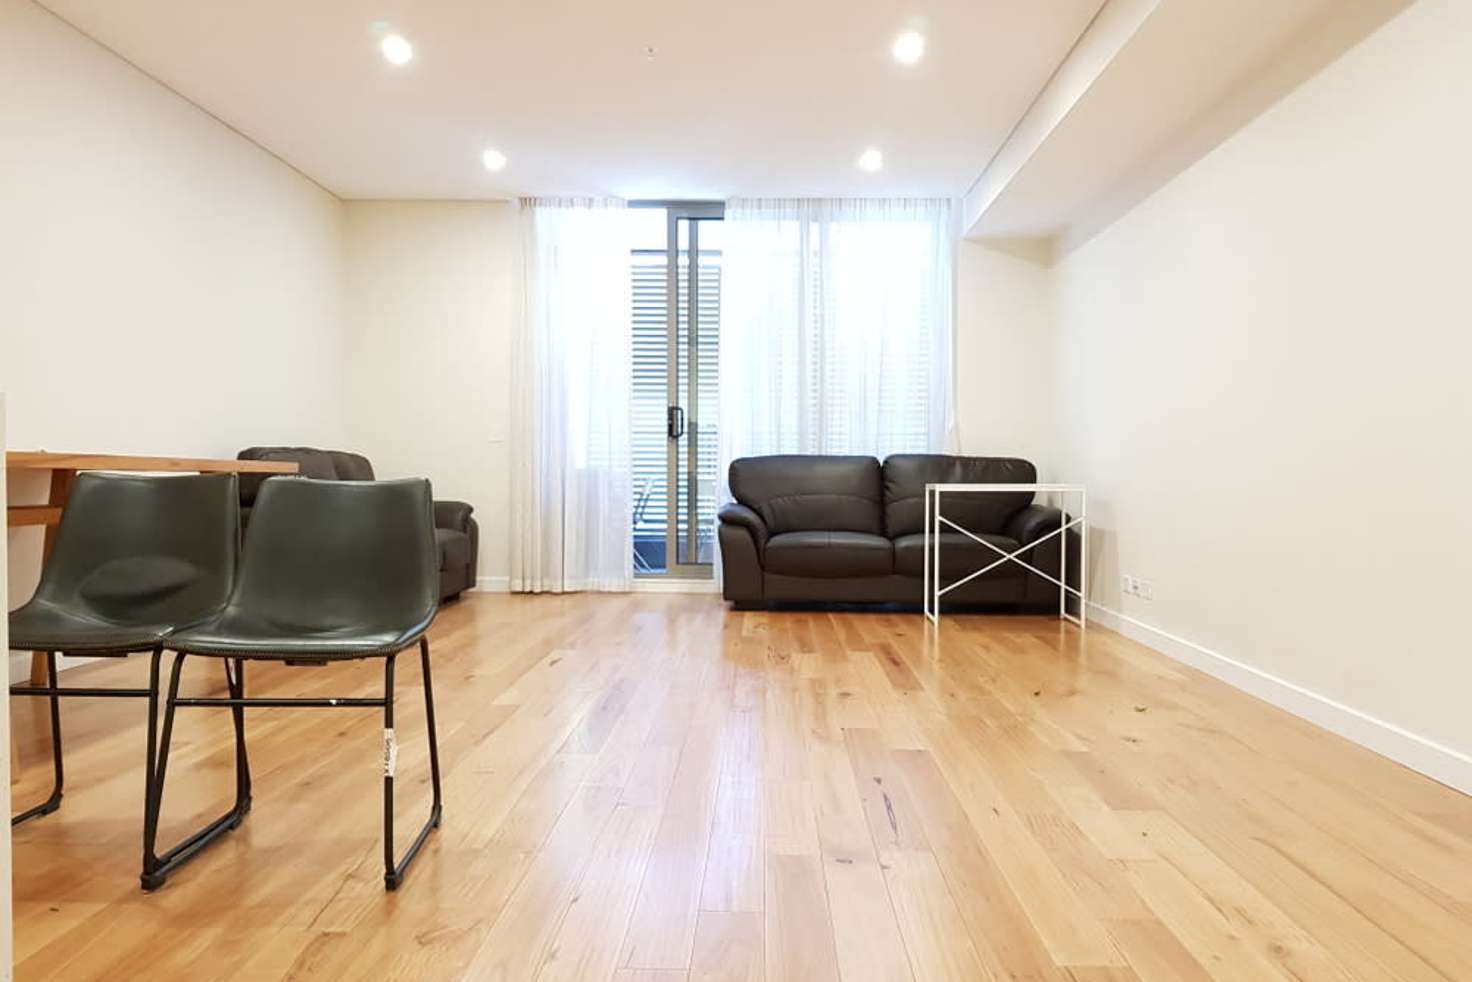 Main view of Homely apartment listing, 201/5 Atchison St, St Leonards NSW 2065